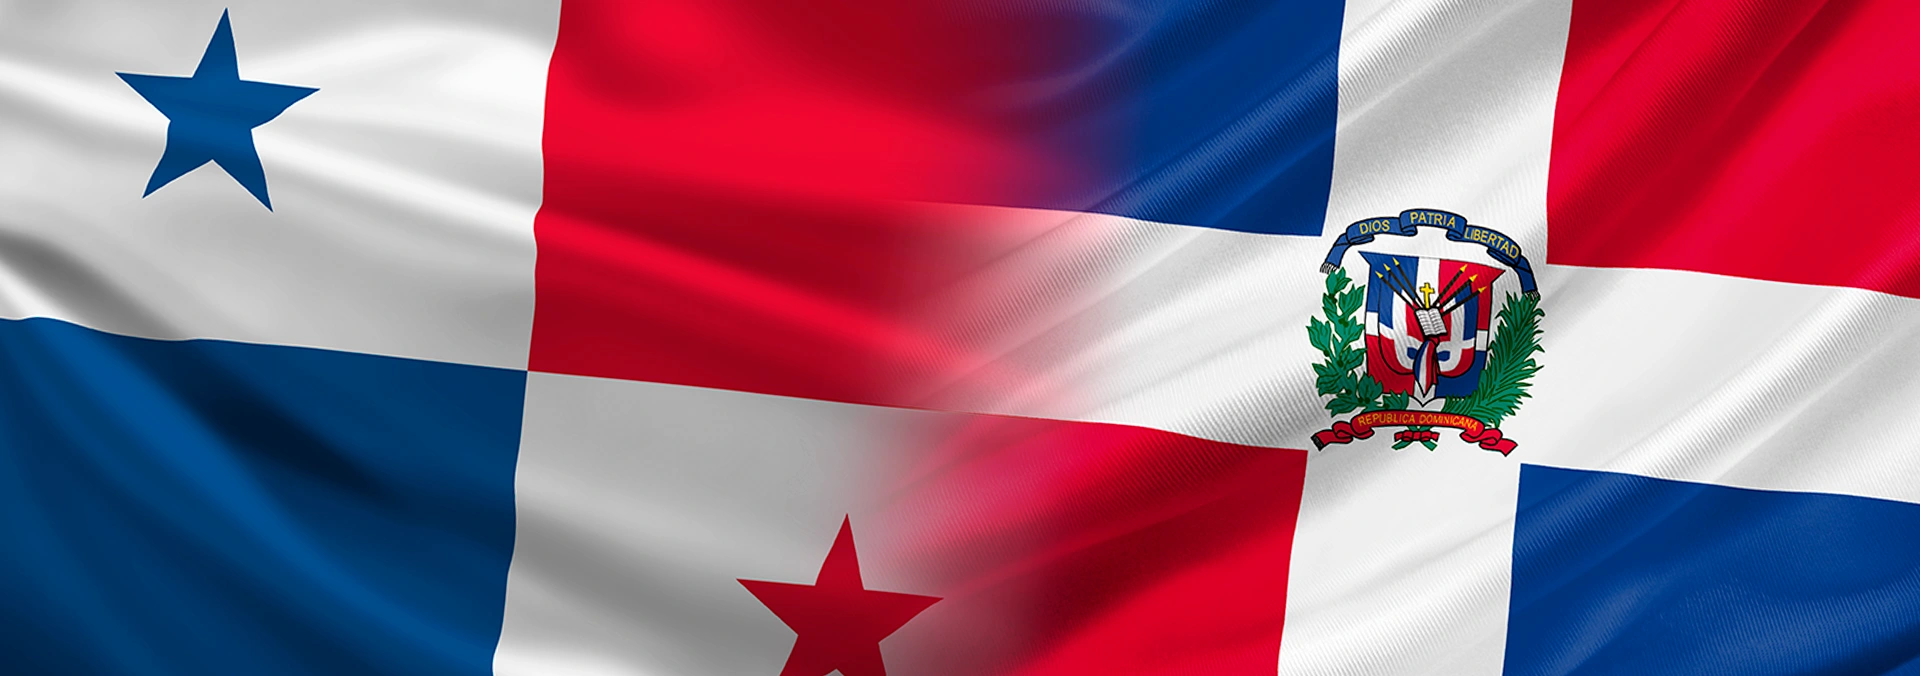 Nuproxa arrives in Panama and Dominican Republic